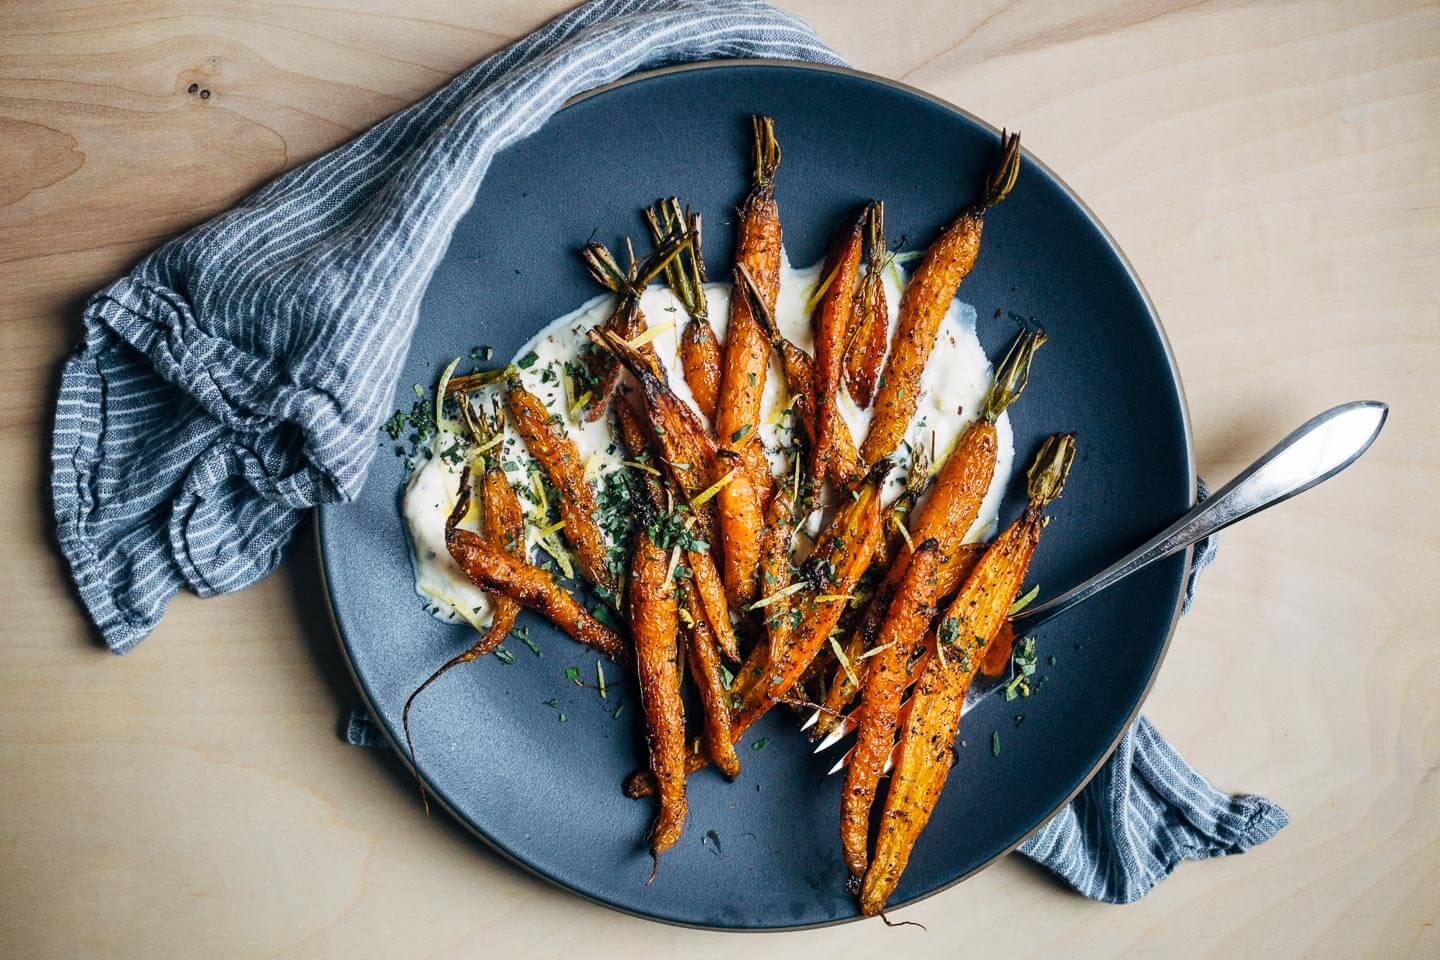 An autumnal roasted carrot salad recipe with cracked pepper and cumin crème fraîche.